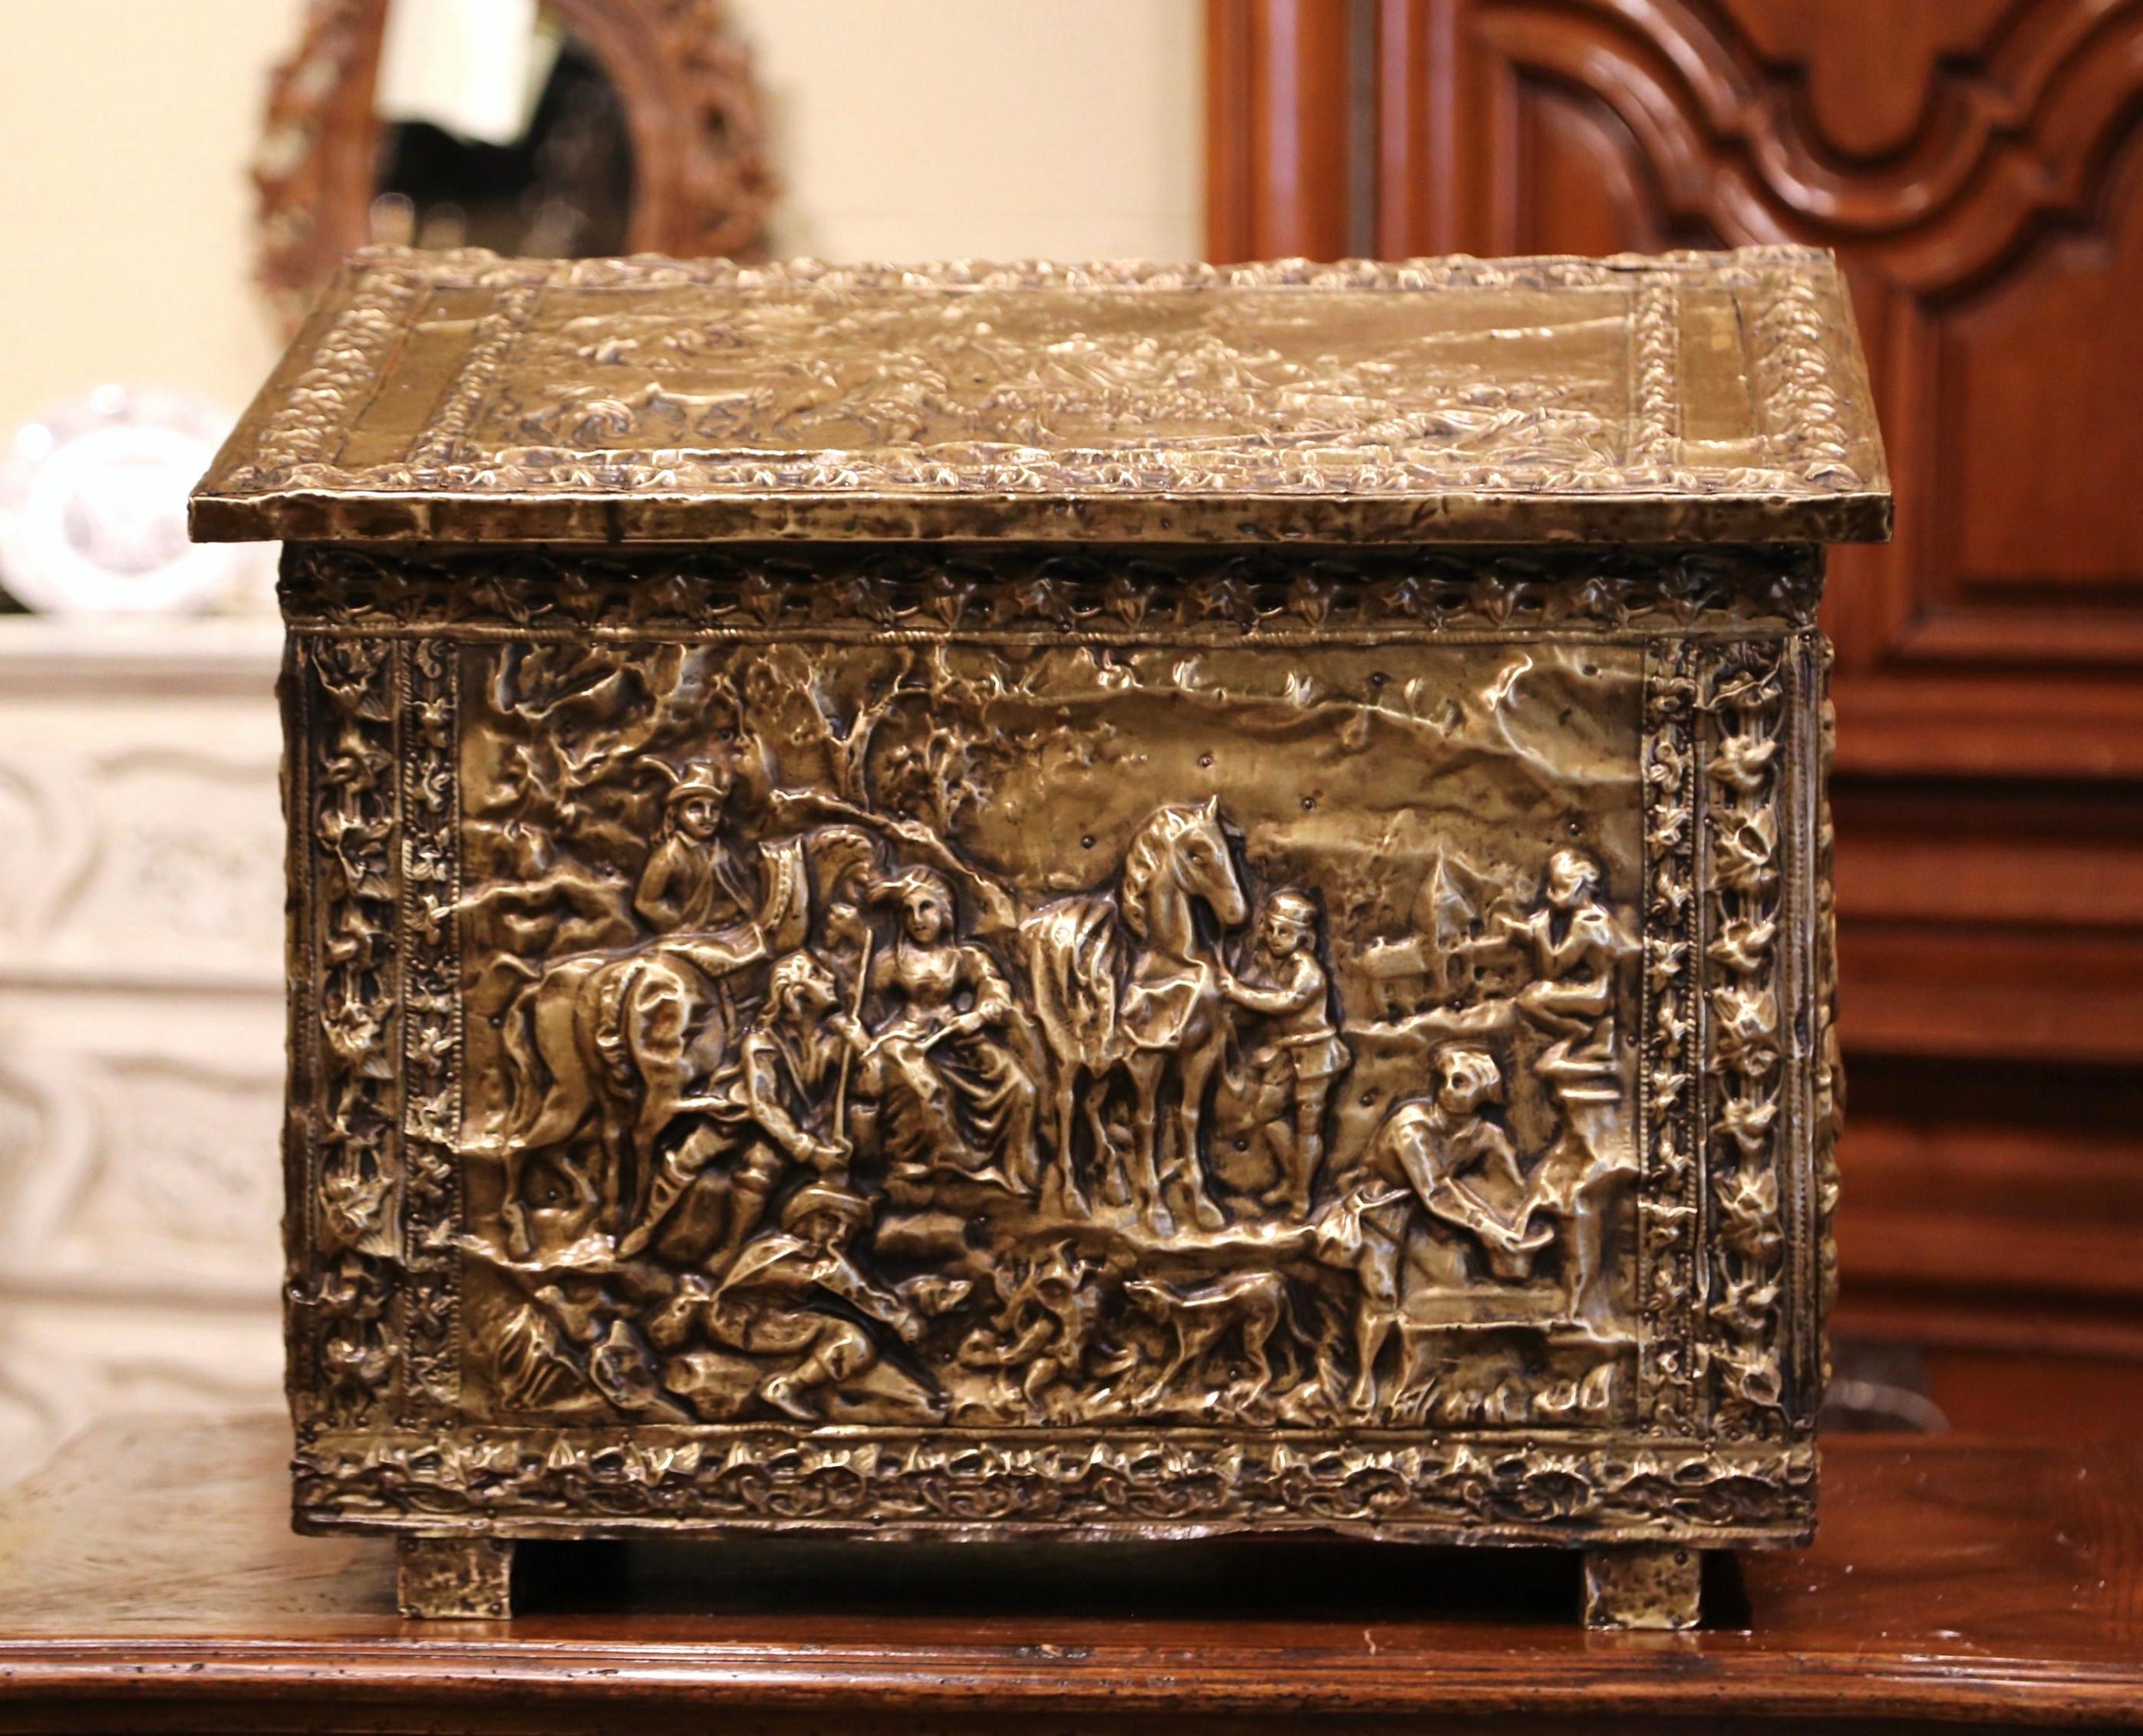 Crafted in France, circa 1870, the antique wooden and brass coffer is decorated with repousse pastoral scenes on all four sides and features a slant top opening to inside storage. The decorative trunk is in excellent condition and has the original